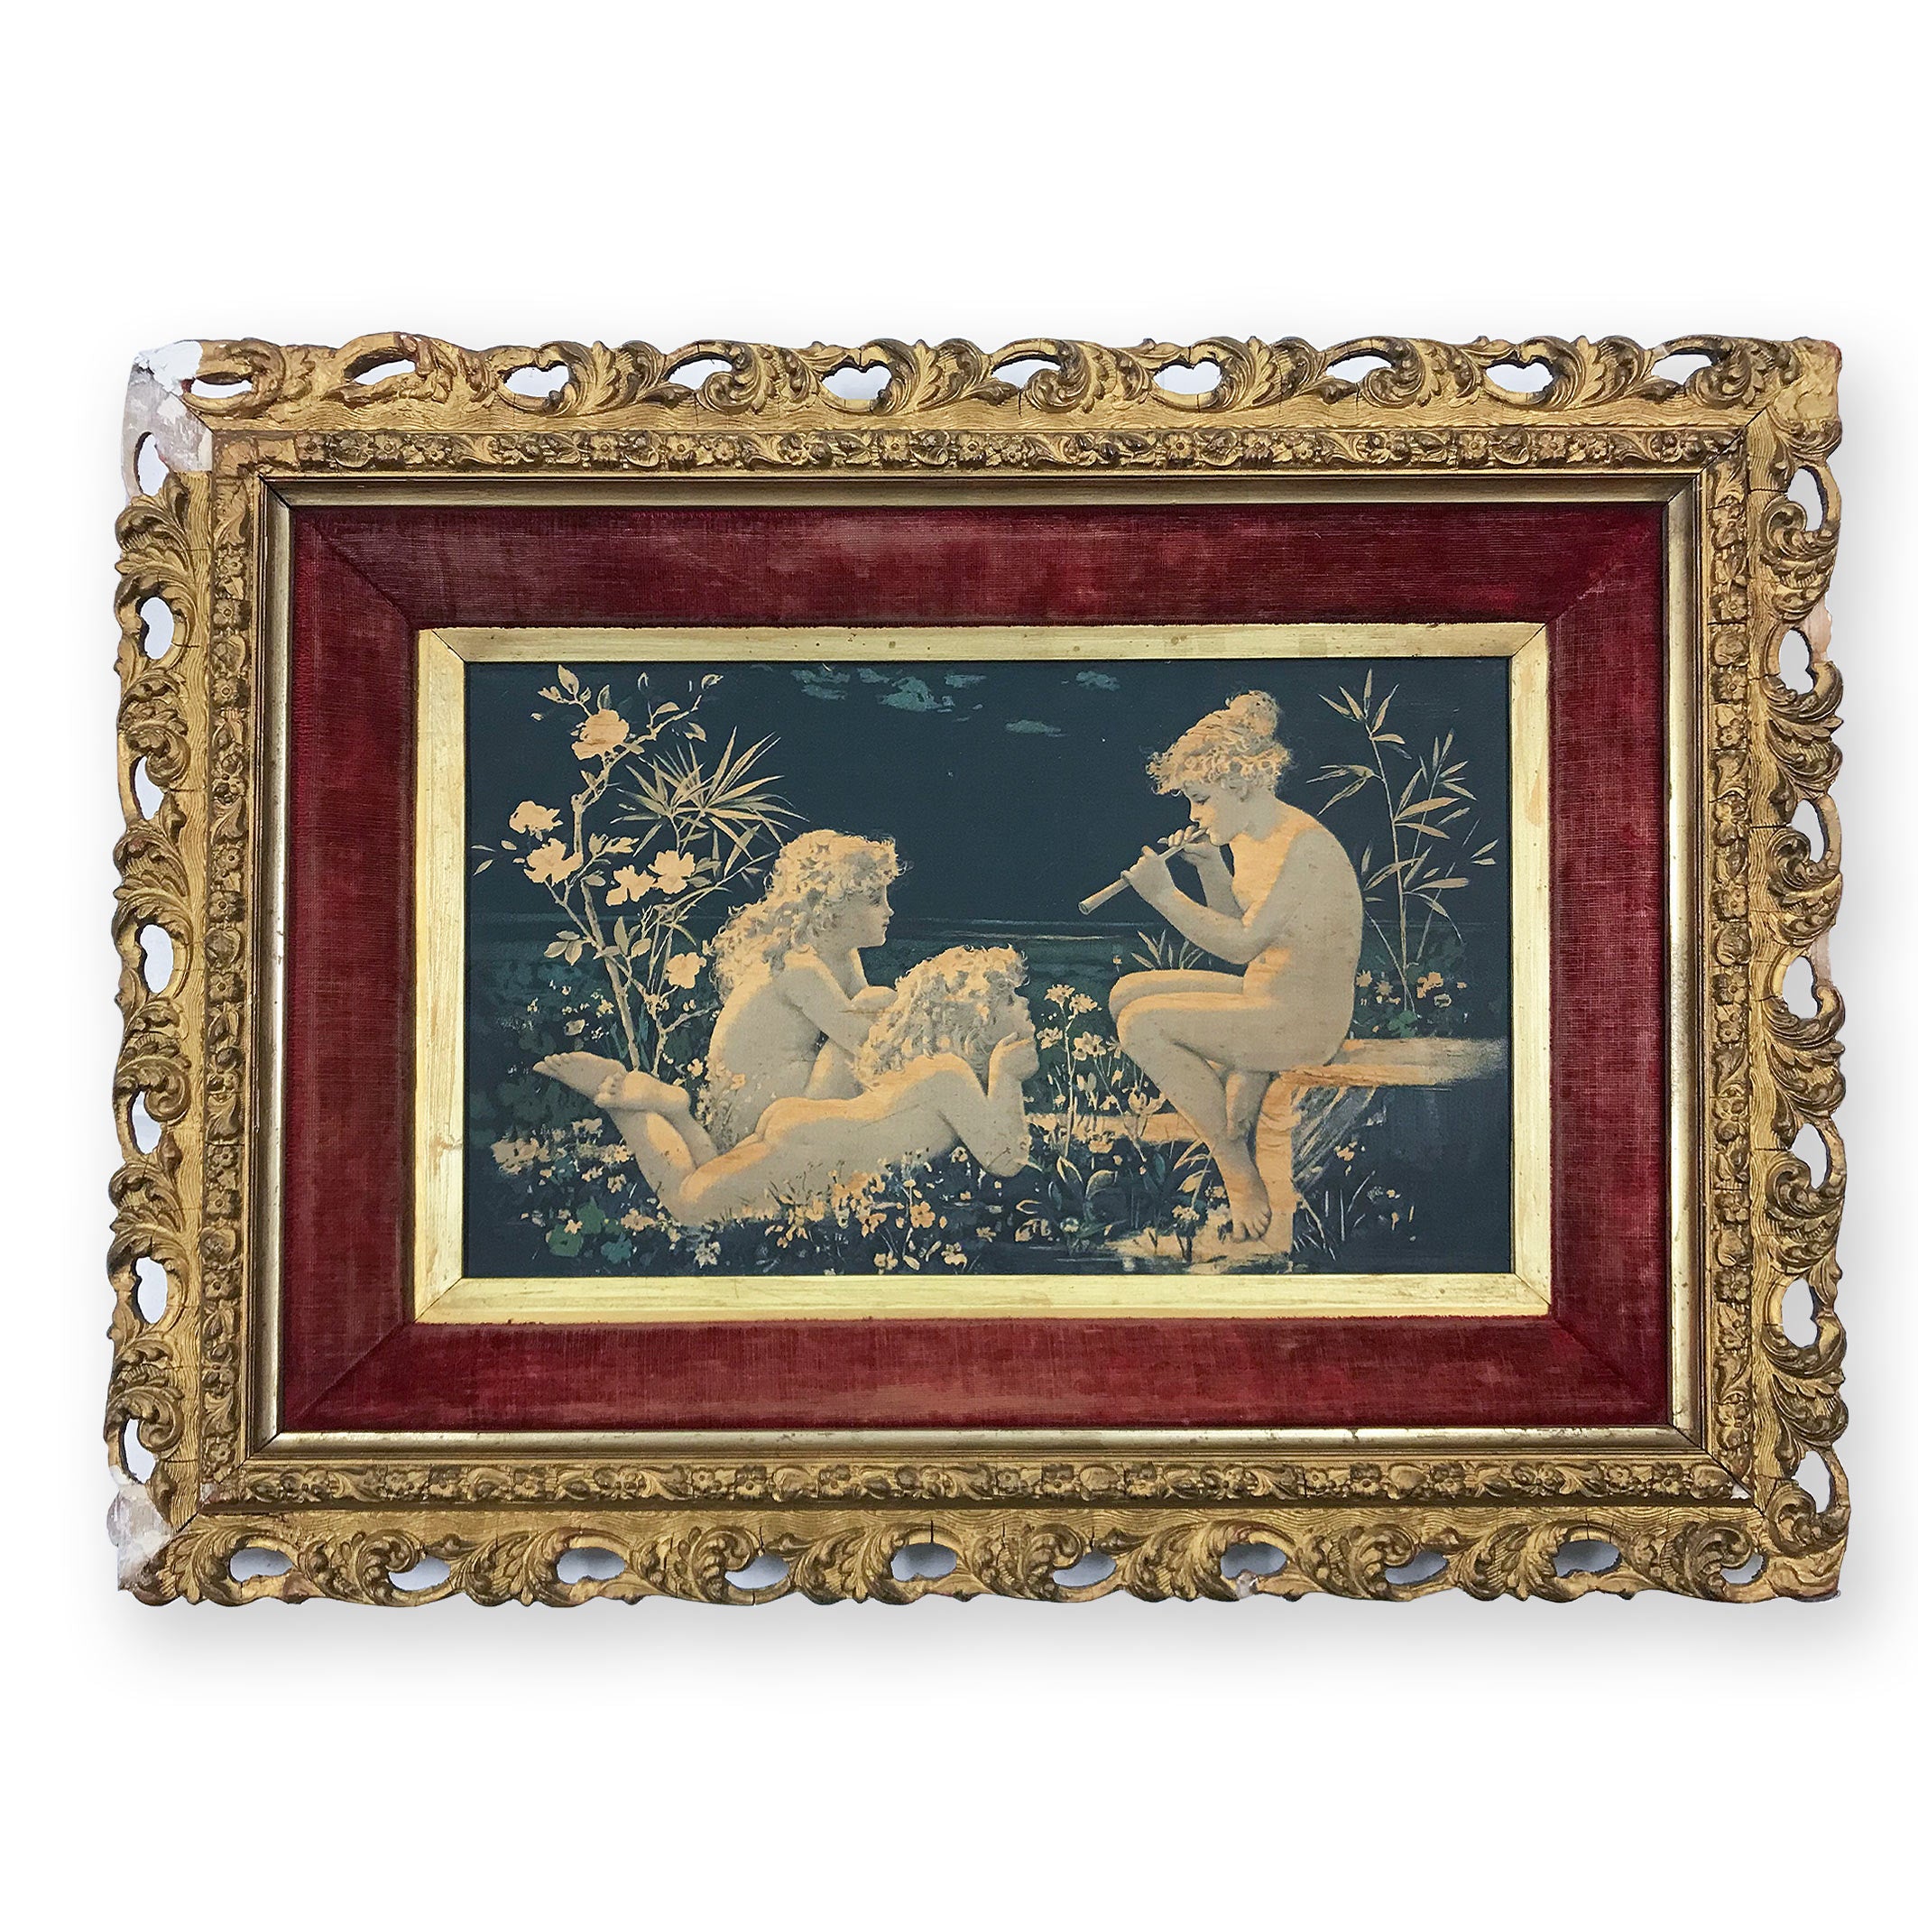 Antique Silk Picture. Find Art, Antique Etchings & other Antique Prints at IntoVintage.co.uk